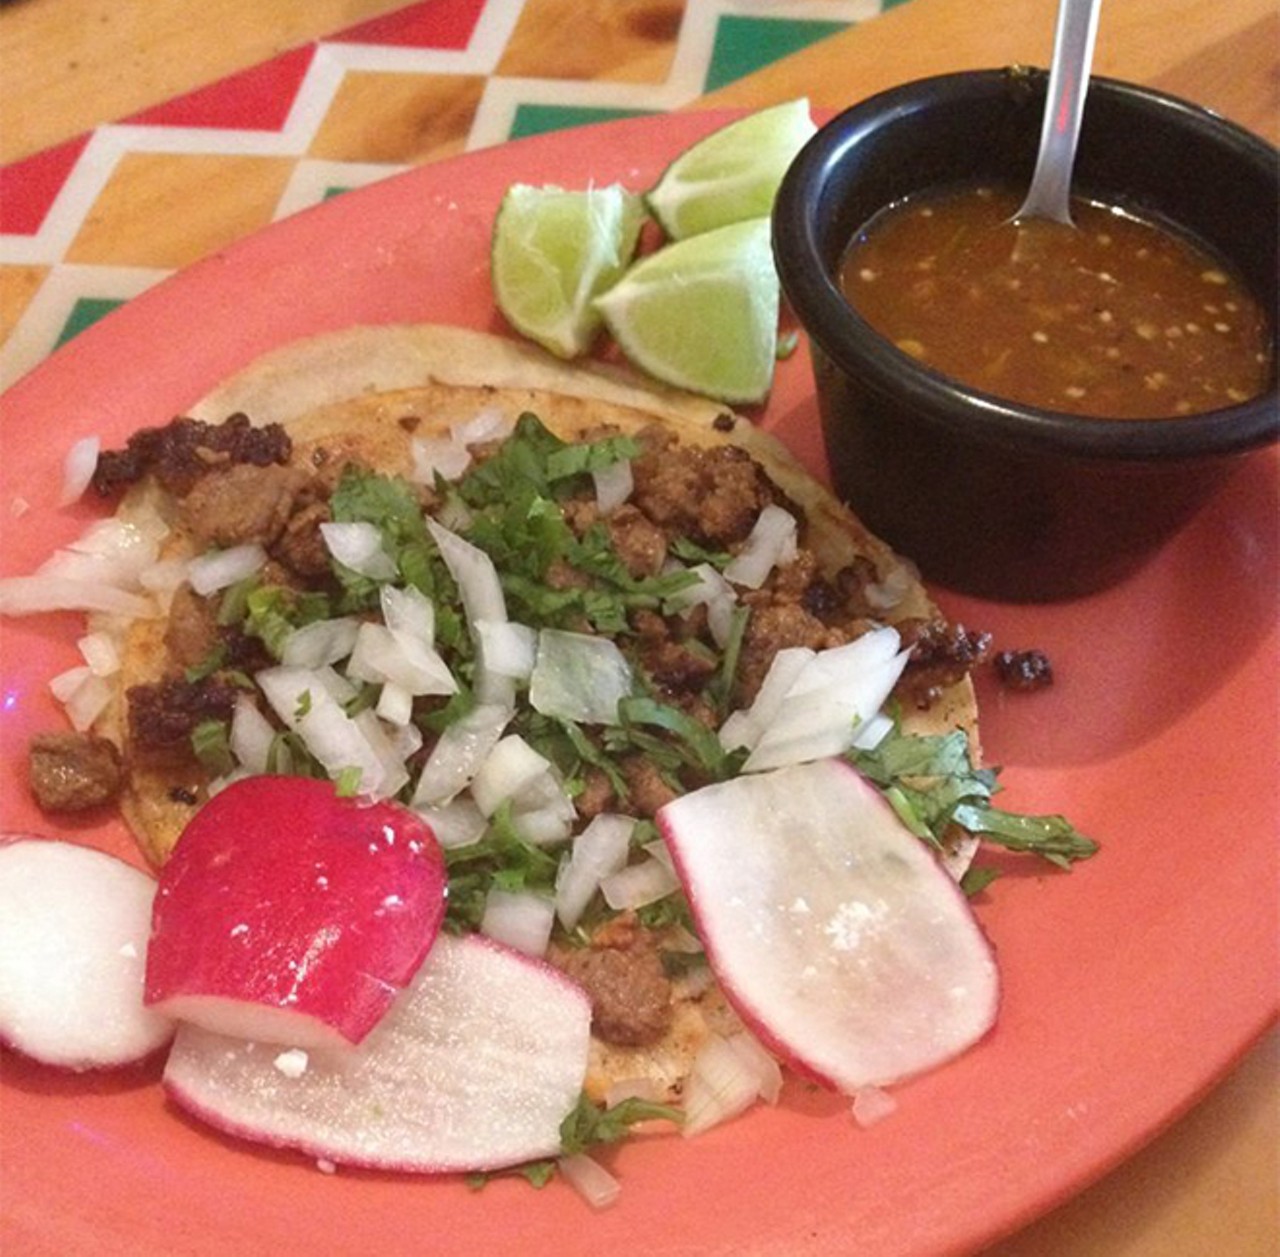 El Tenampa
11242 S. Orange Blossom Trail, 407-850-9499
Come for the carne asada tacos, stay for the live mariachi band.
Photo via Yelp